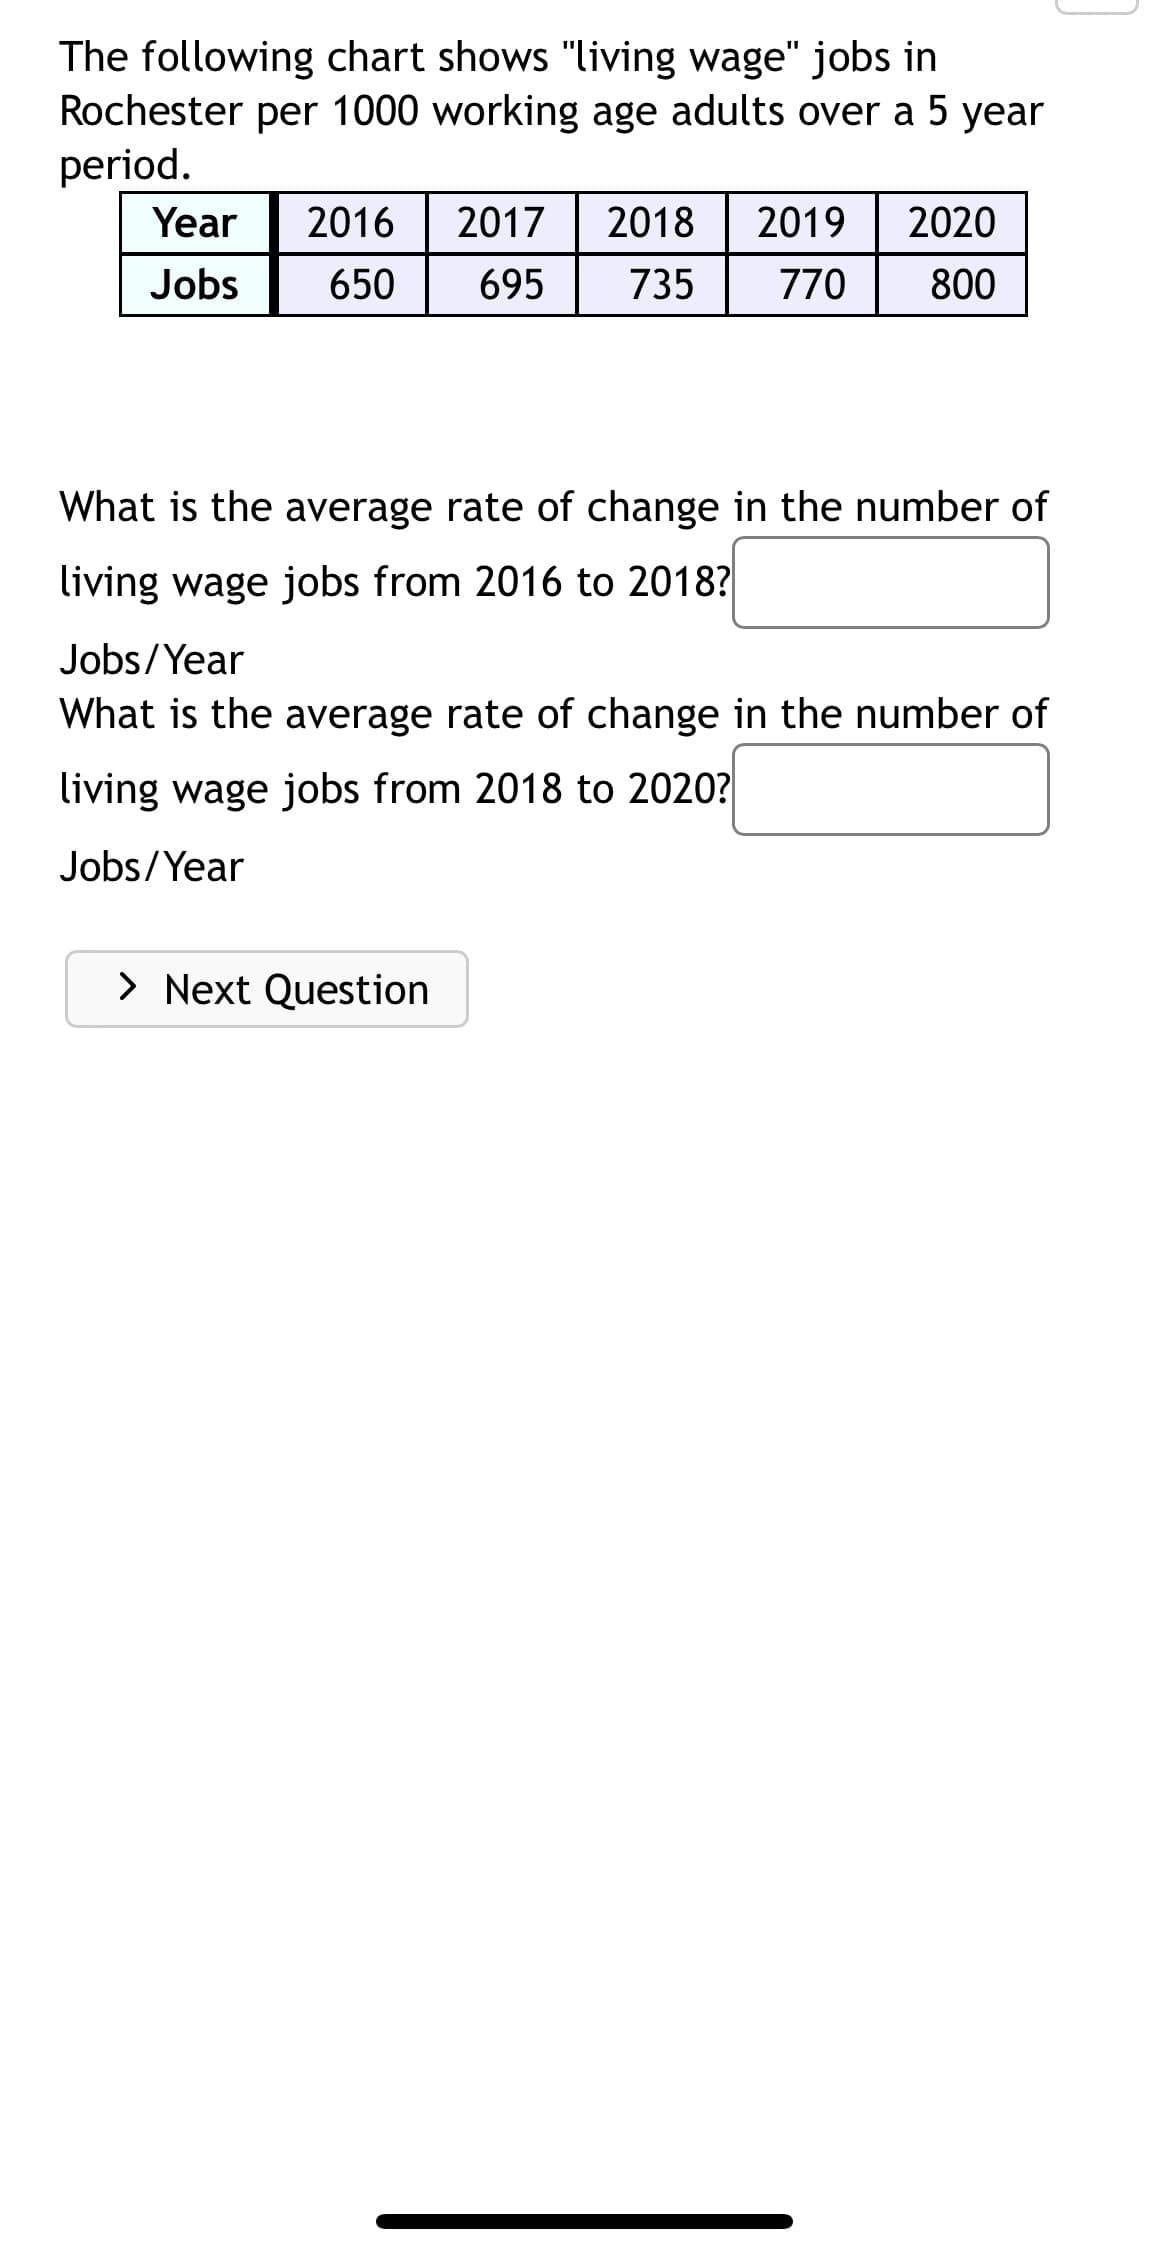 The following chart shows "living wage" jobs in
Rochester per 1000 working age adults over a 5 year
period.
Year
2016
2017
2018
2019
2020
Jobs
650
695
735
770
800
What is the average rate of change in the number of
living wage jobs from 2016 to 2018?
Jobs/Year
What is the average rate of change in the number of
living wage jobs from 2018 to 2020?
Jobs/Year
> Next Question
